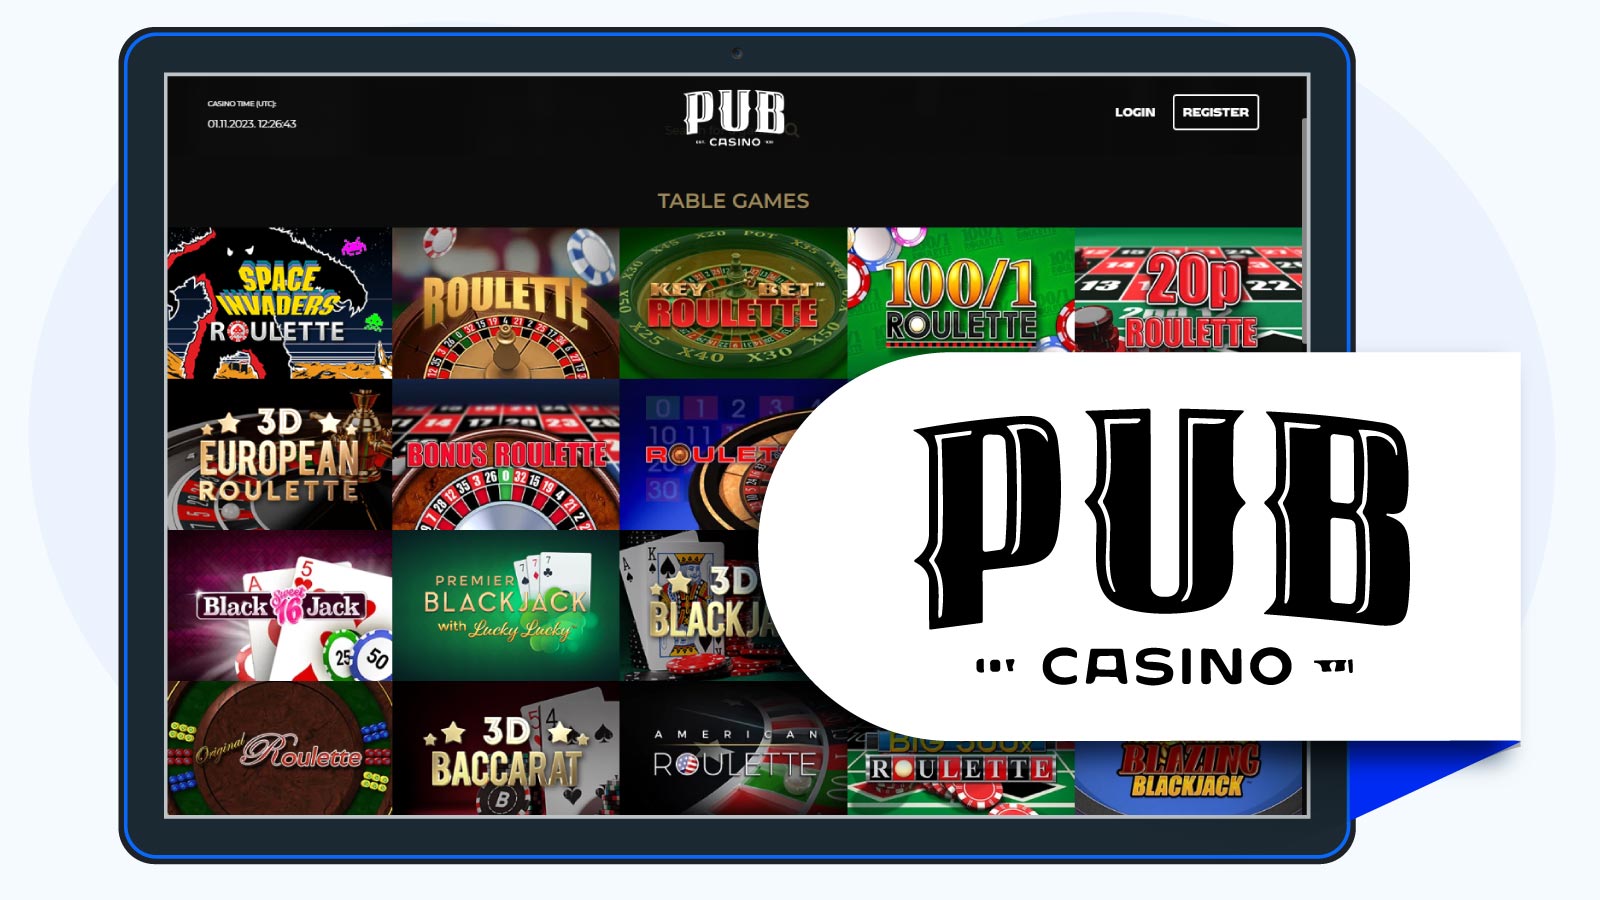 Pub Casino Best for Apple Pay Transactions